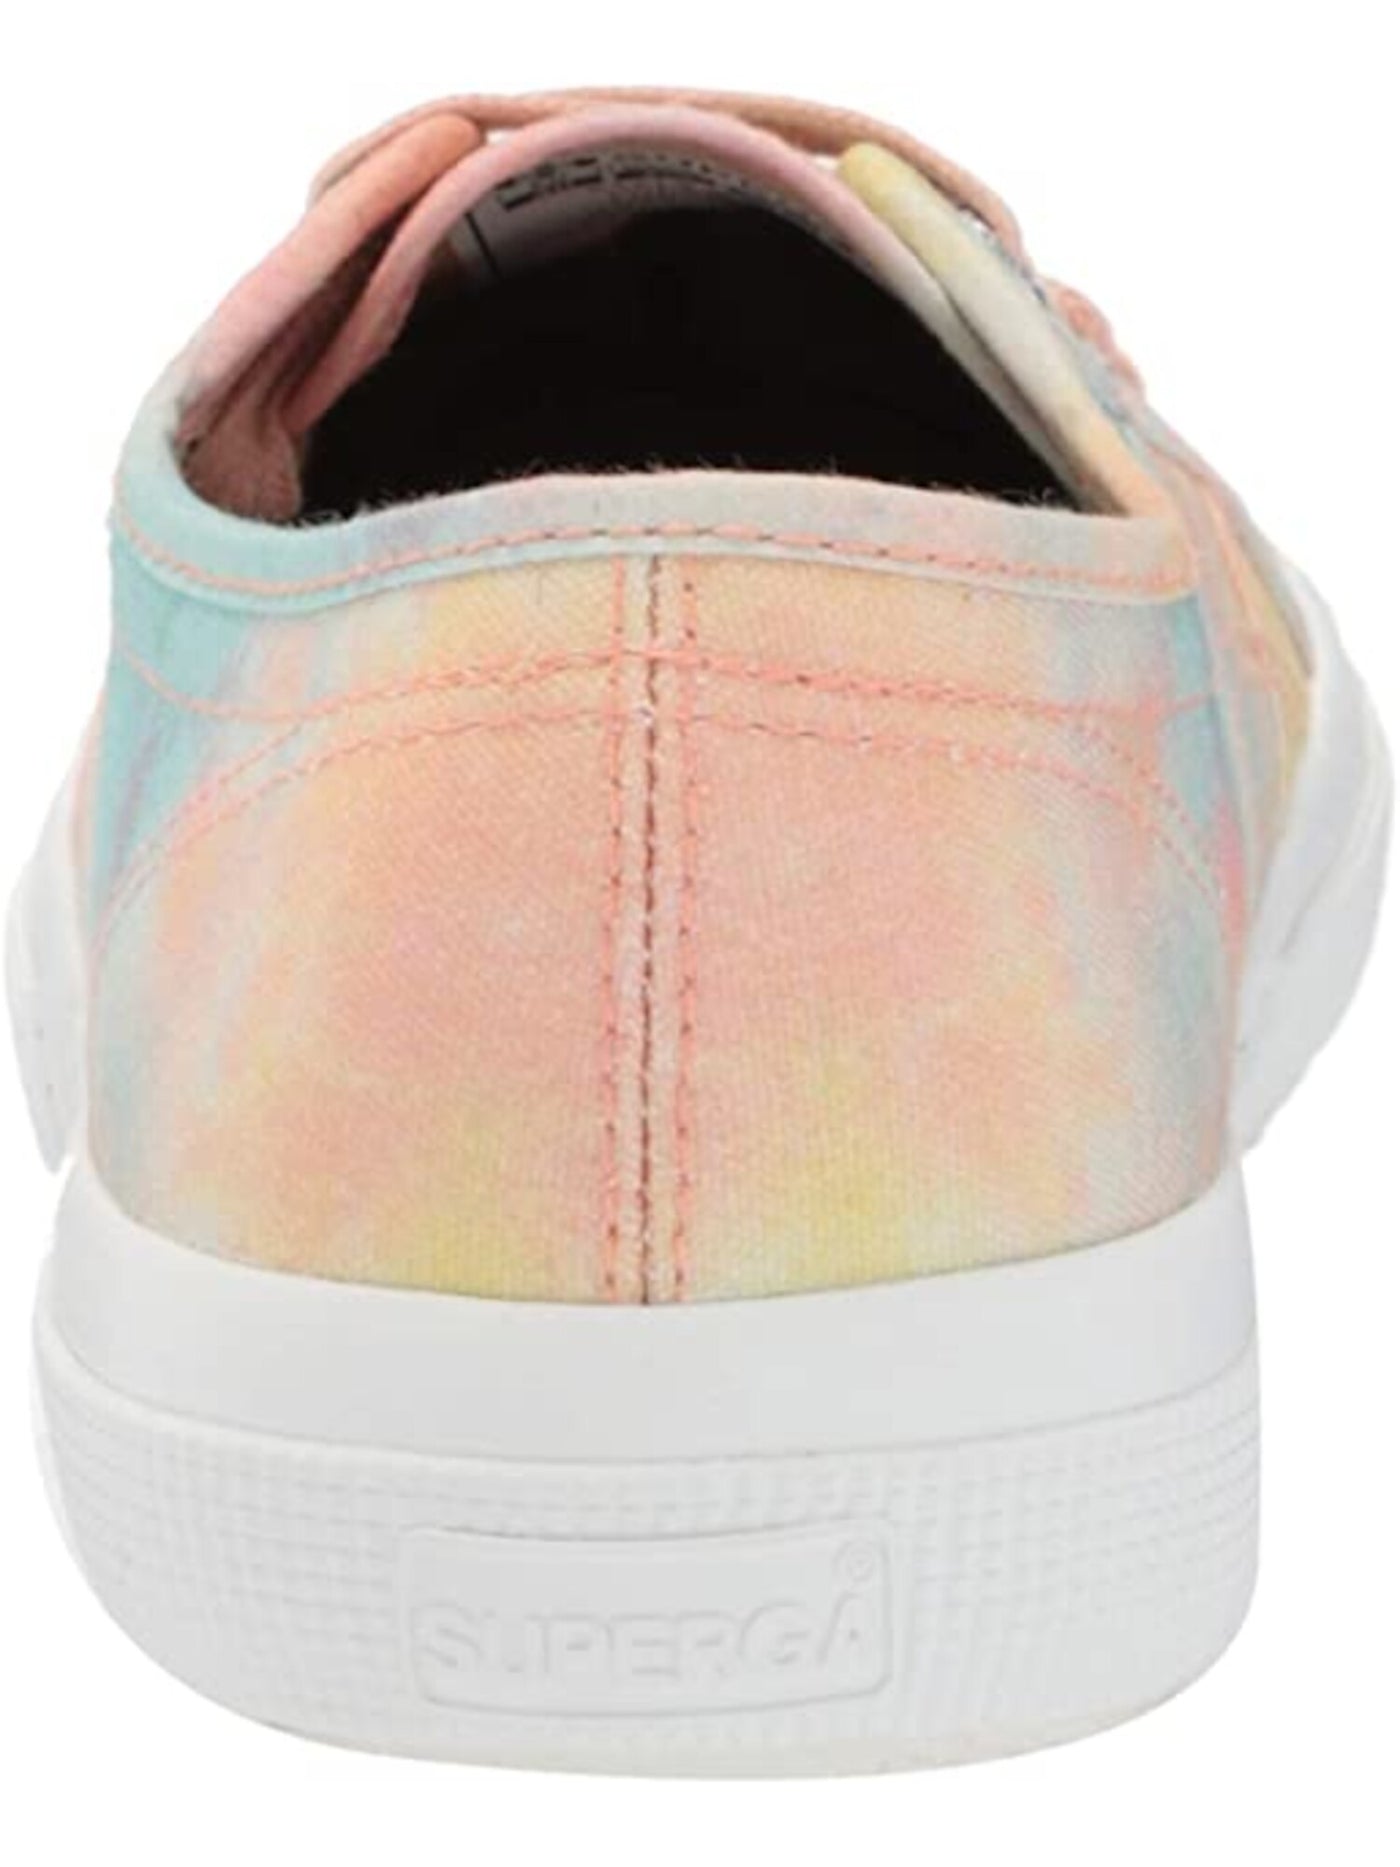 SUPERGA Womens Orange Tie Dye Traction Metal Eyelets Cushioned Logo Fantasy Cotu Round Toe Lace-Up Athletic Sneakers Shoes 41